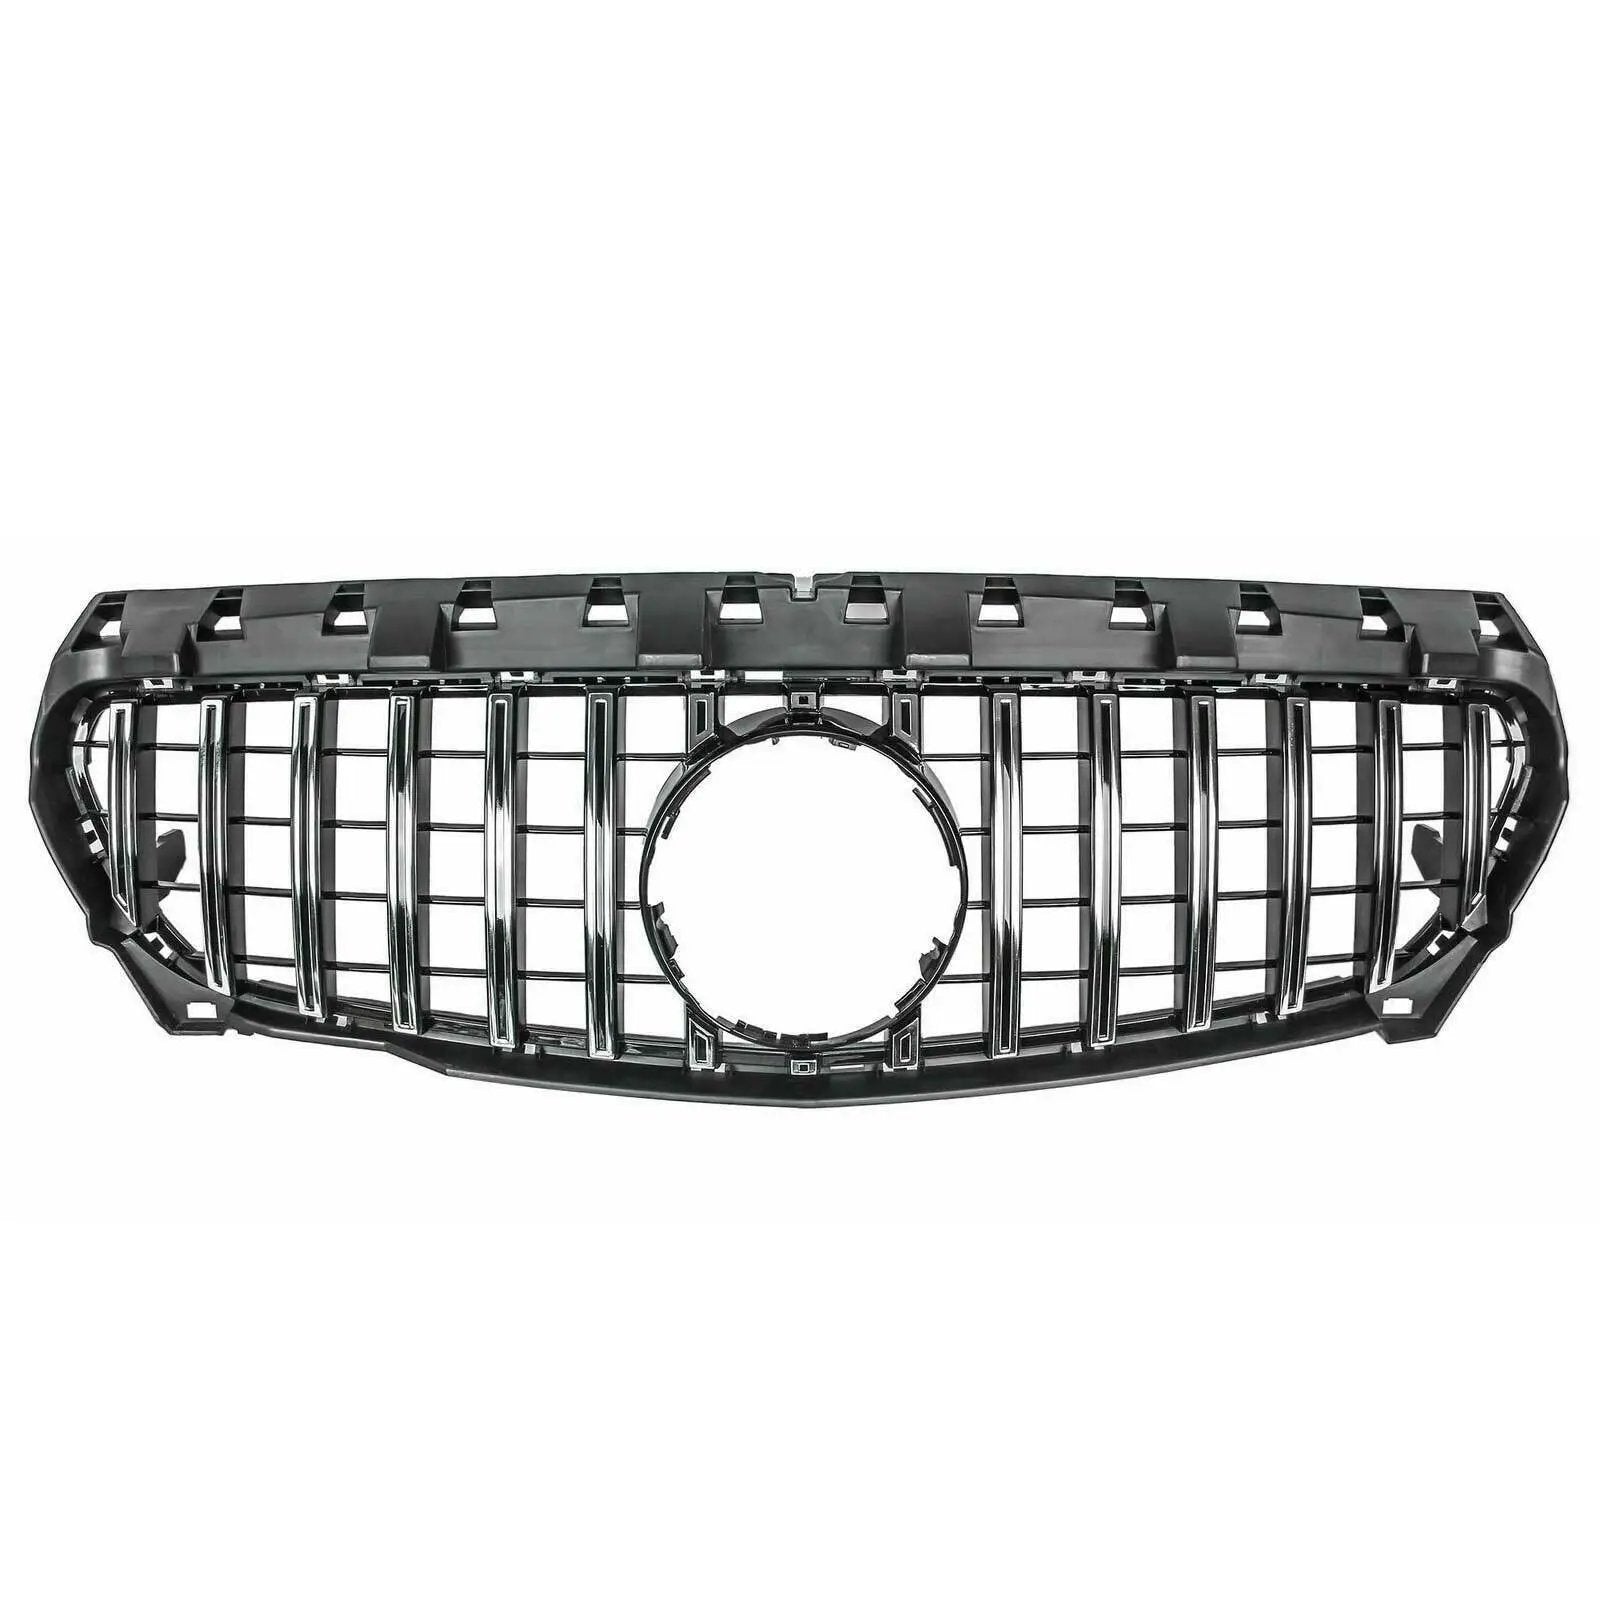 GT-R Chrome Front Grille for Mercedes Benz W117 CLA200 CLA250 13-16